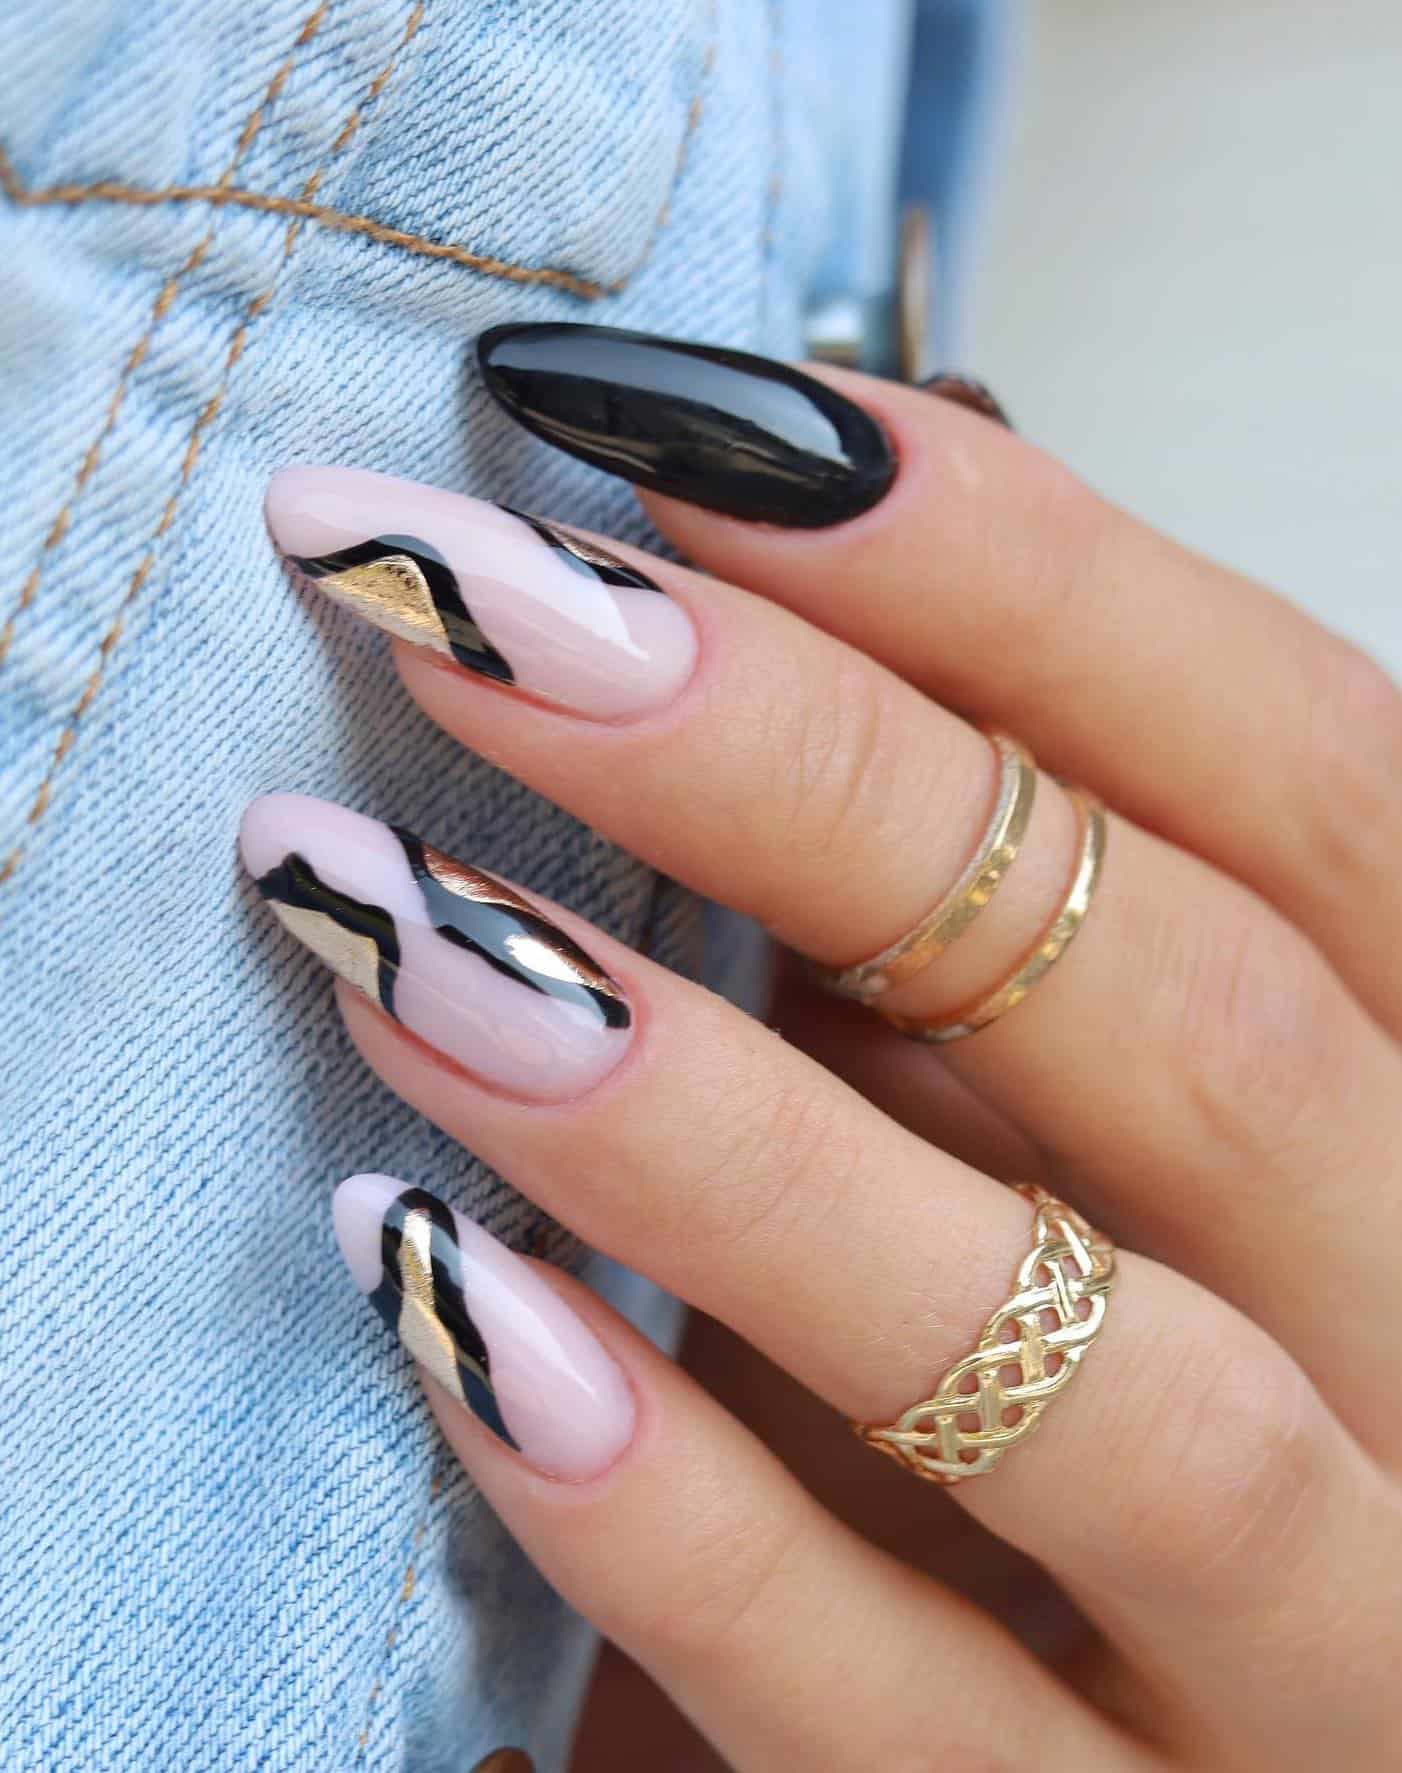 Long nude pink almond nails with black and gold details and solid-colored black accent nails